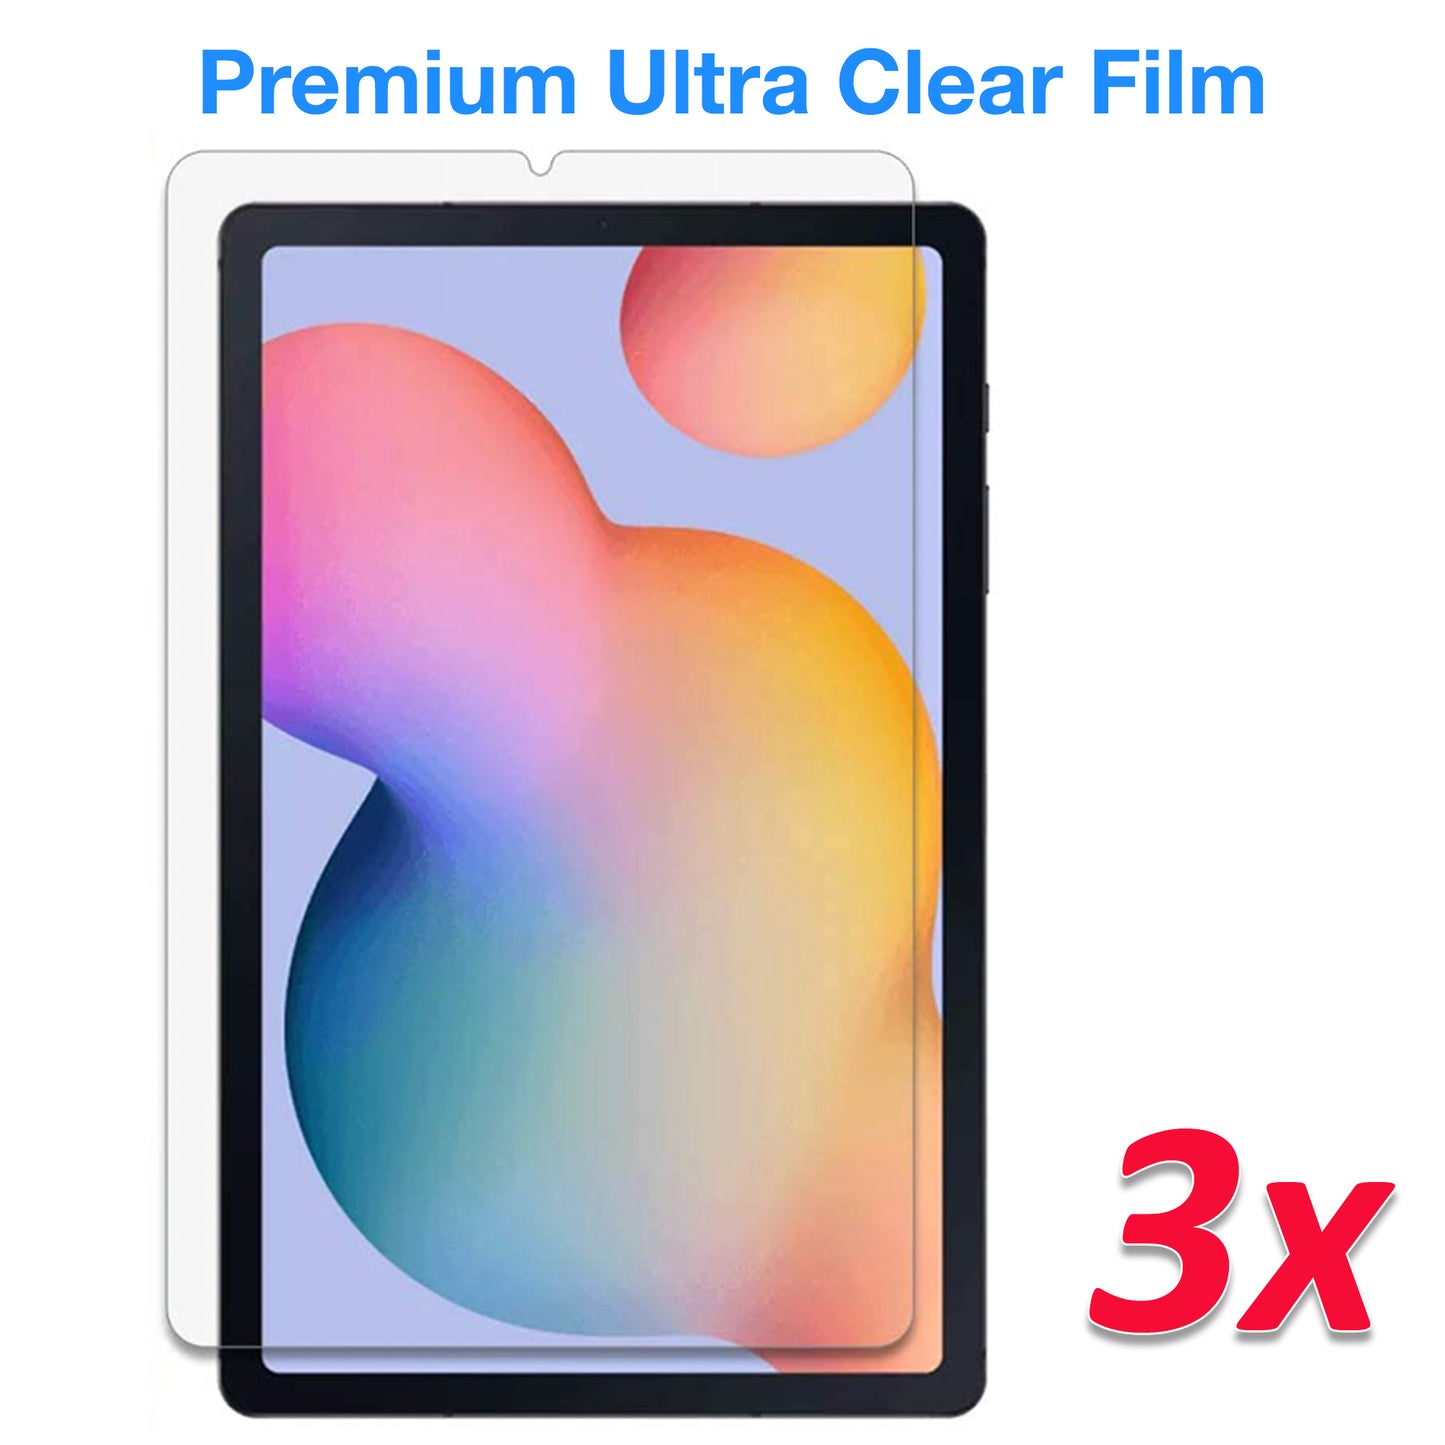 [3 Pack] MEZON Samsung Galaxy Tab S6 Lite 10.4" Ultra Clear Film Screen Protector (SM-P610, P615, Clear)